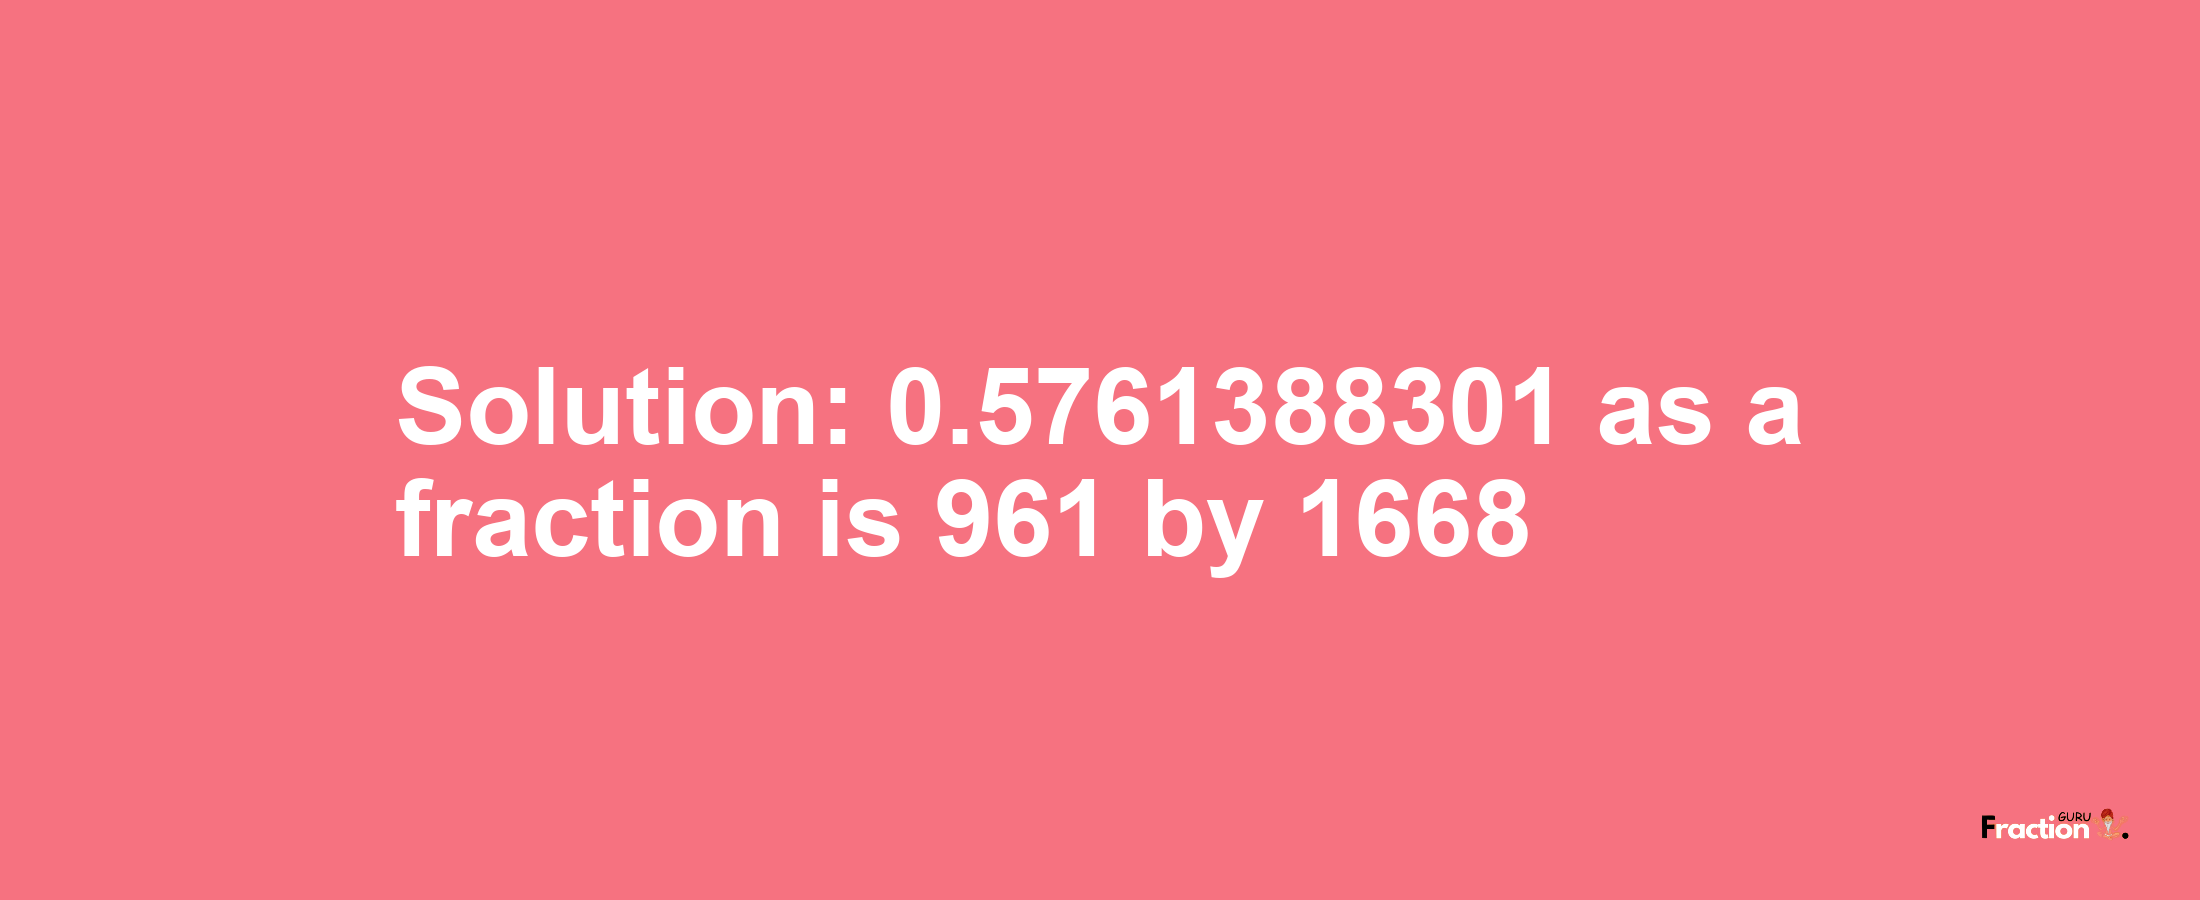 Solution:0.5761388301 as a fraction is 961/1668